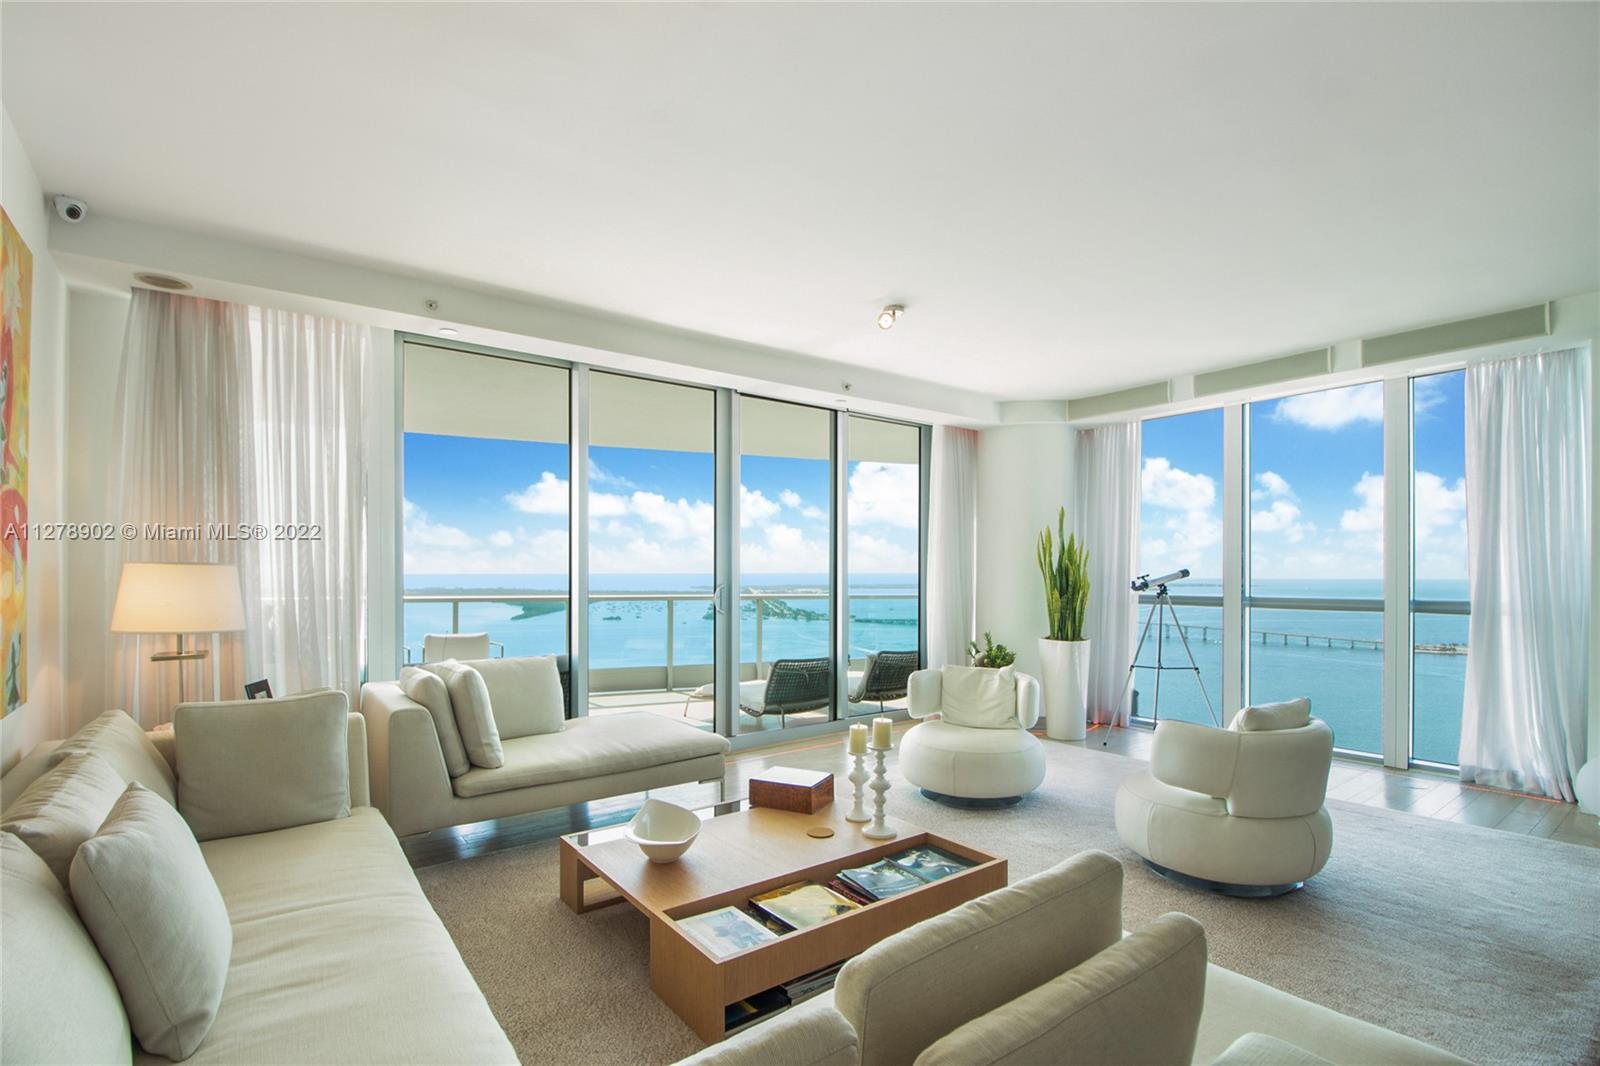 Spectacular wide bay and ocean views from this spacious 4BR/4.5BA SE corner unit at Jade Brickell. Enjoy breathtaking sunrises & sunsets from 3 large terraces. Best line in building. Floor-through unit, private elevator, spacious living/dining area w/ unobstructed water views, modern kitchen w/ top-of-the-line appliances, high-impact windows, electric shades, built-in sound system, central
lighting system, everything controlled by Ipads, 3 parking spaces (2 on the 3rd floor & 1 on the ground floor). Amenities include: infinity-edge pool w/views of Biscayne Bay, fitness center, spa w/saunas, massage & steam rooms, business center, rooftop sky-lounge, business center, racquetball court, pool service, 24-hr security, valet parking, bike storage & utmost personalized
concierge services.